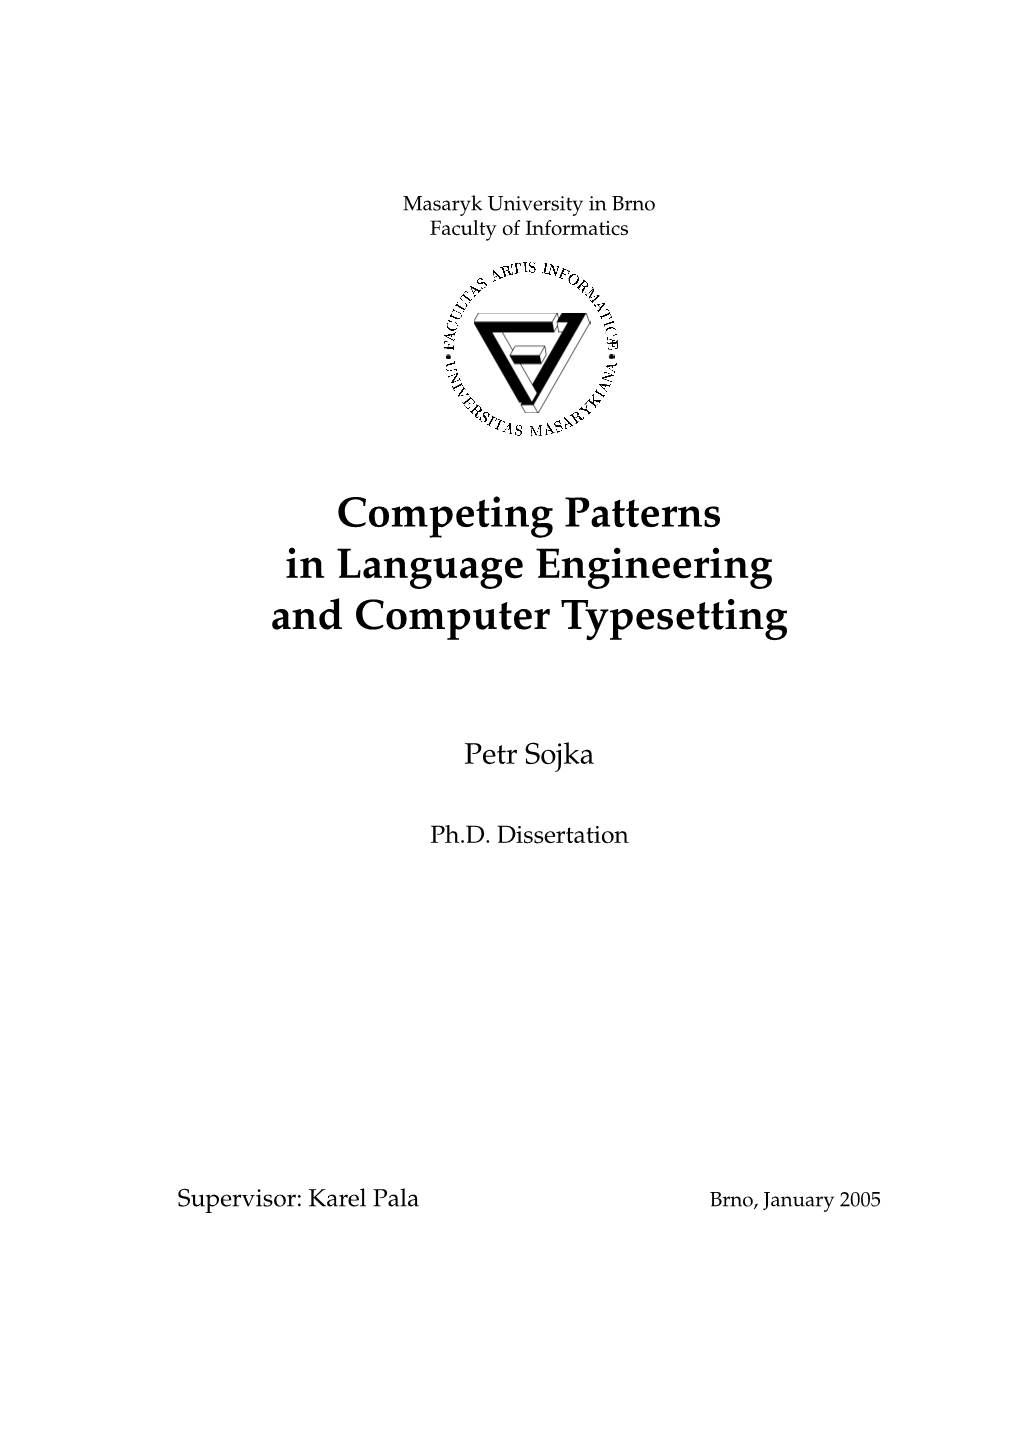 Competing Patterns in Language Engineering and Computer Typesetting